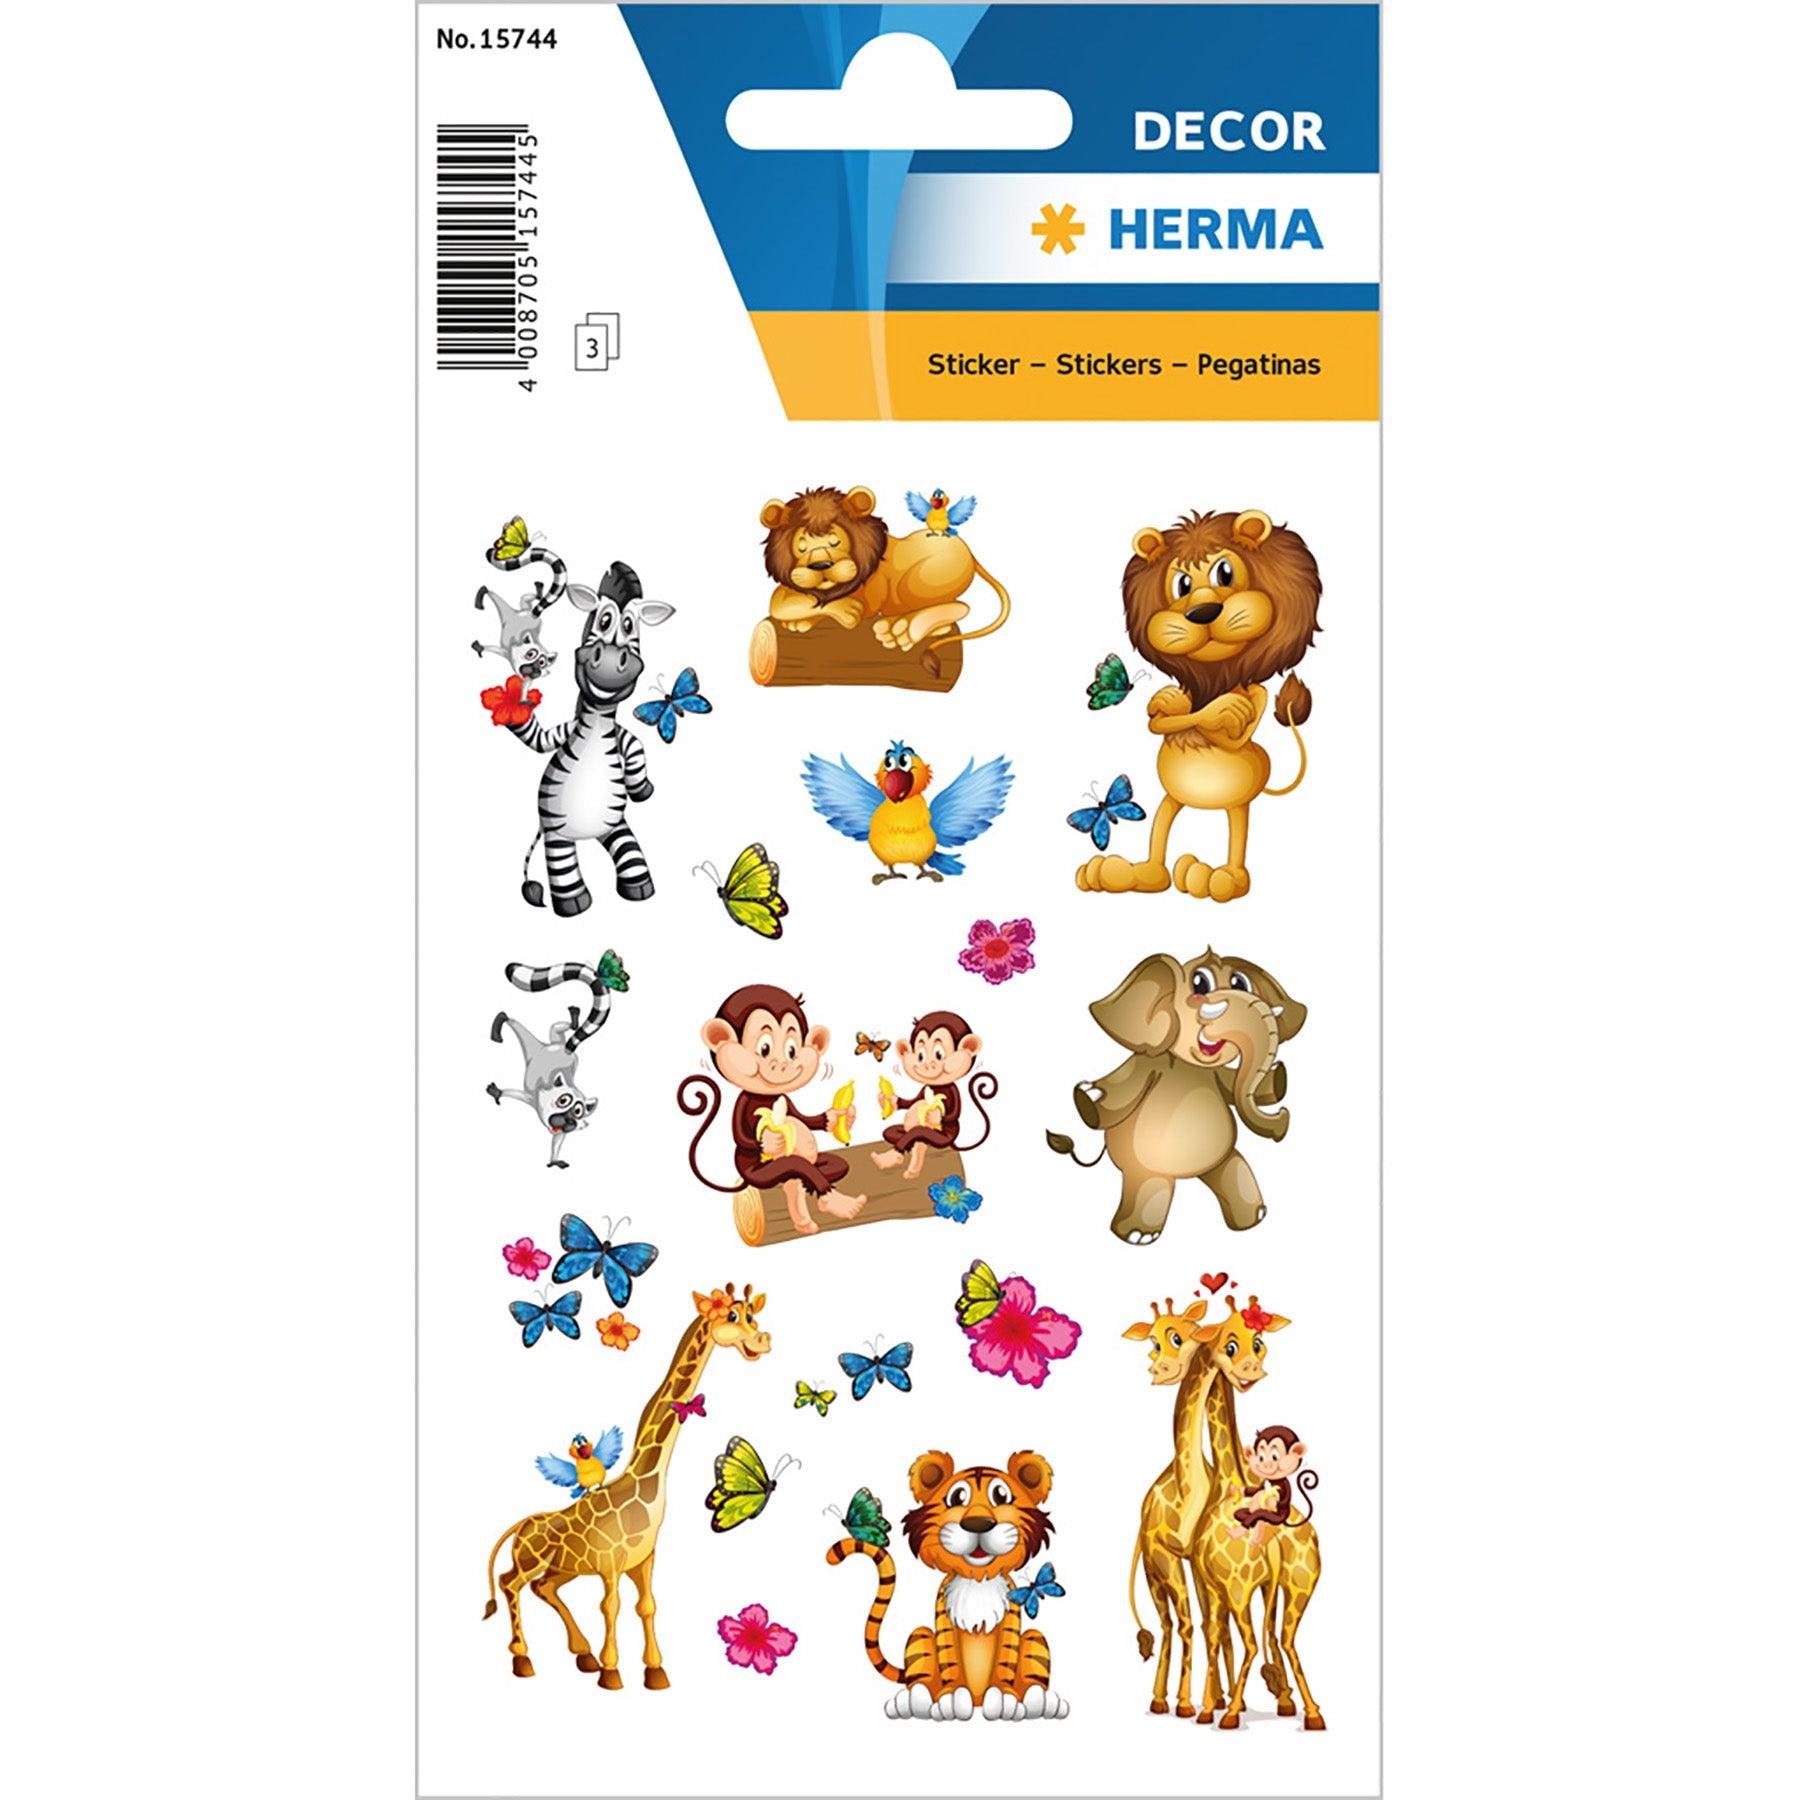 Herma Décor 3 Sheets Stickers Jungle 4.75x3.1in Sheet